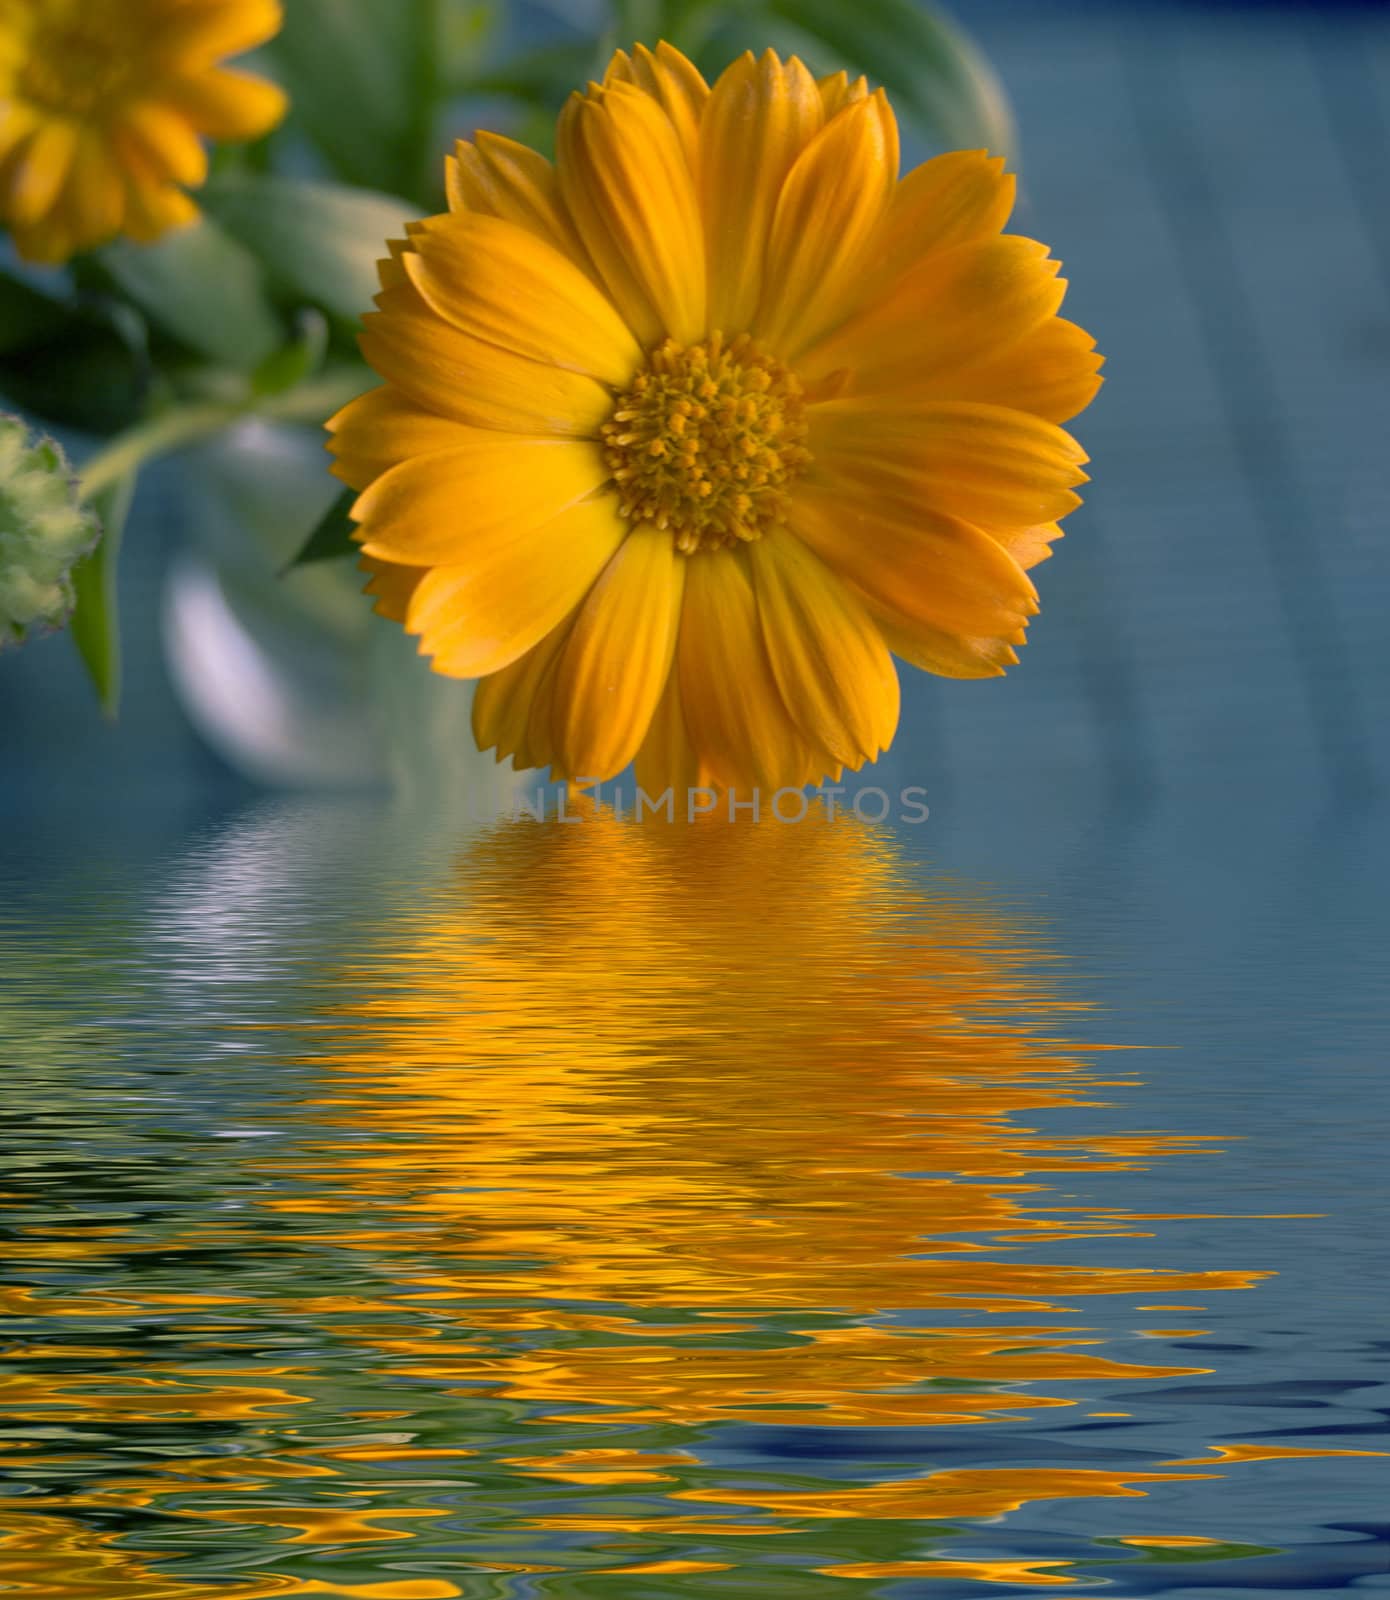 daisy and reflection in water